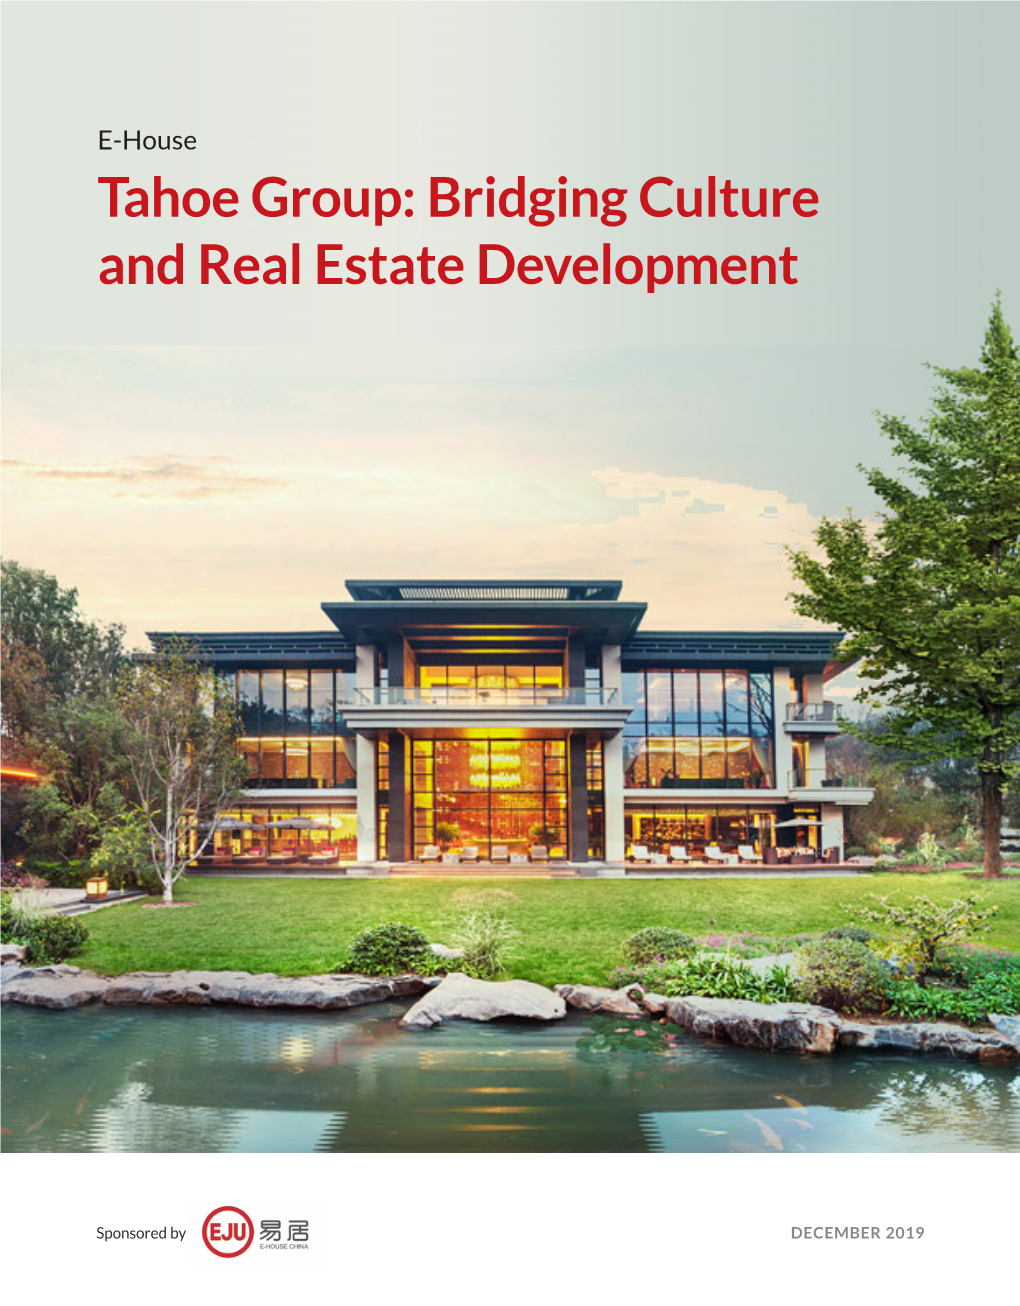 Tahoe Group: Bridging Culture and Real Estate Development